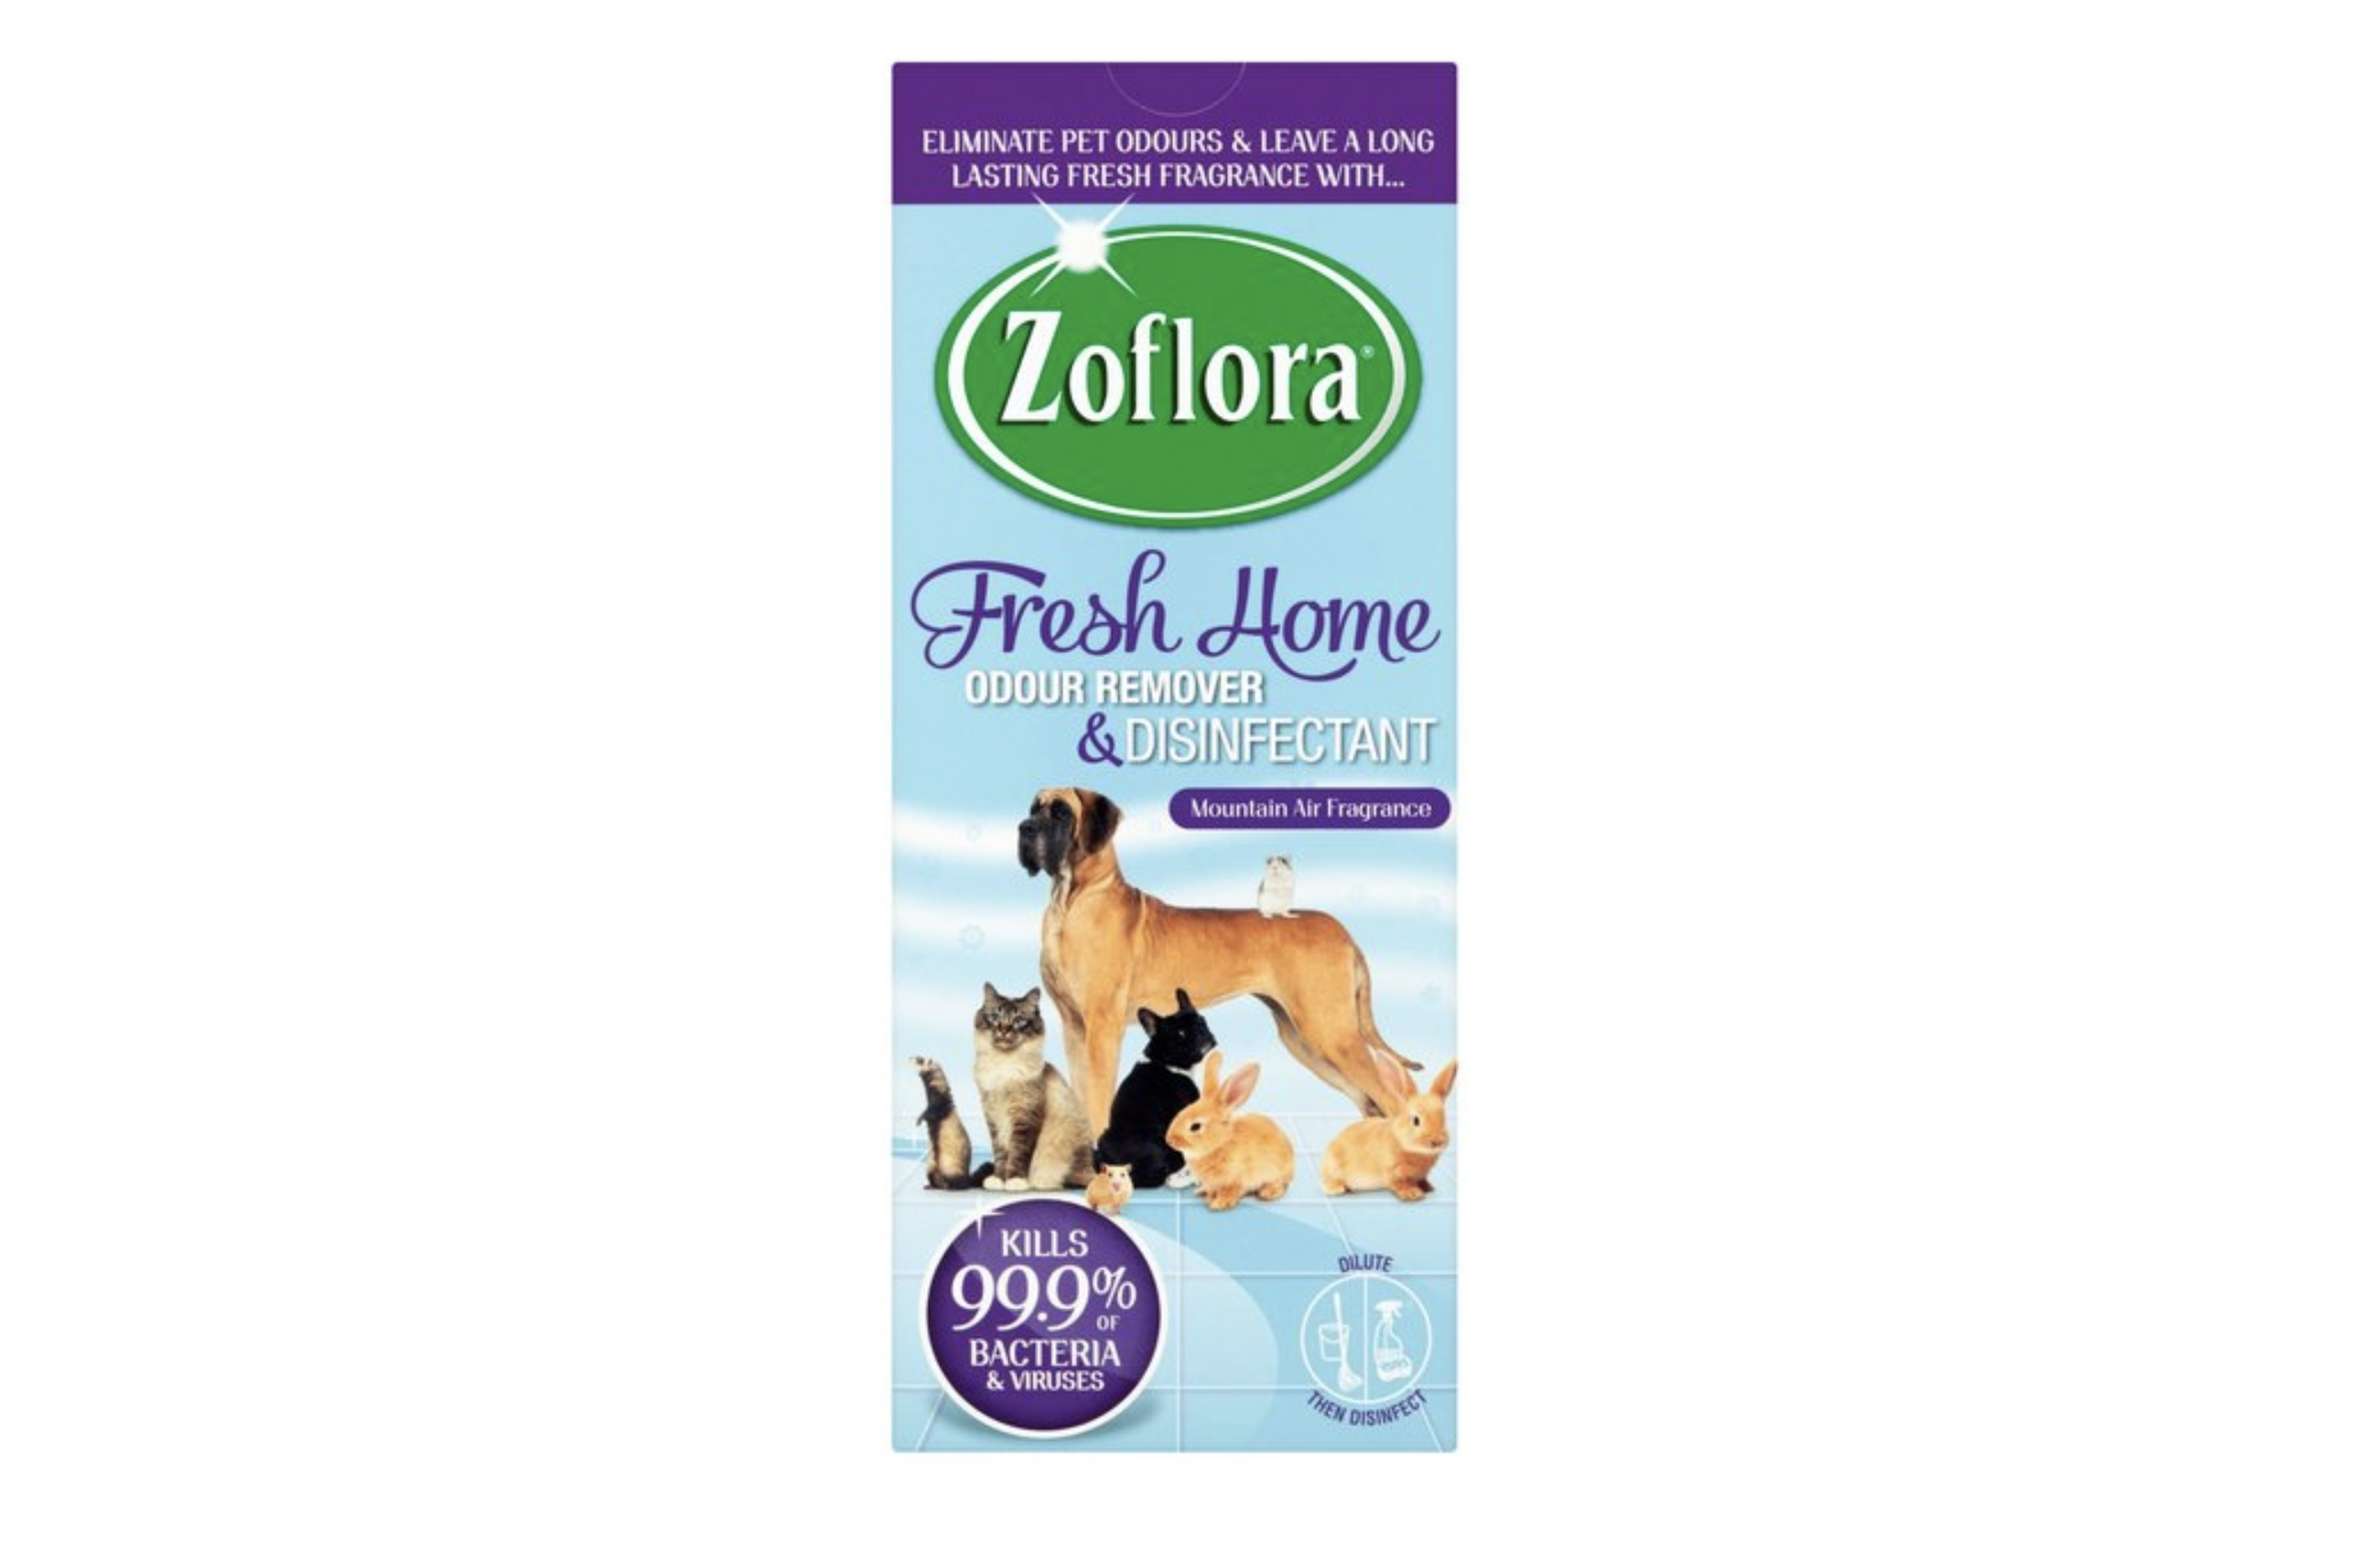 Best air freshener for pet owners: Zoflora Fresh Home Odour Remover & Disinfectant